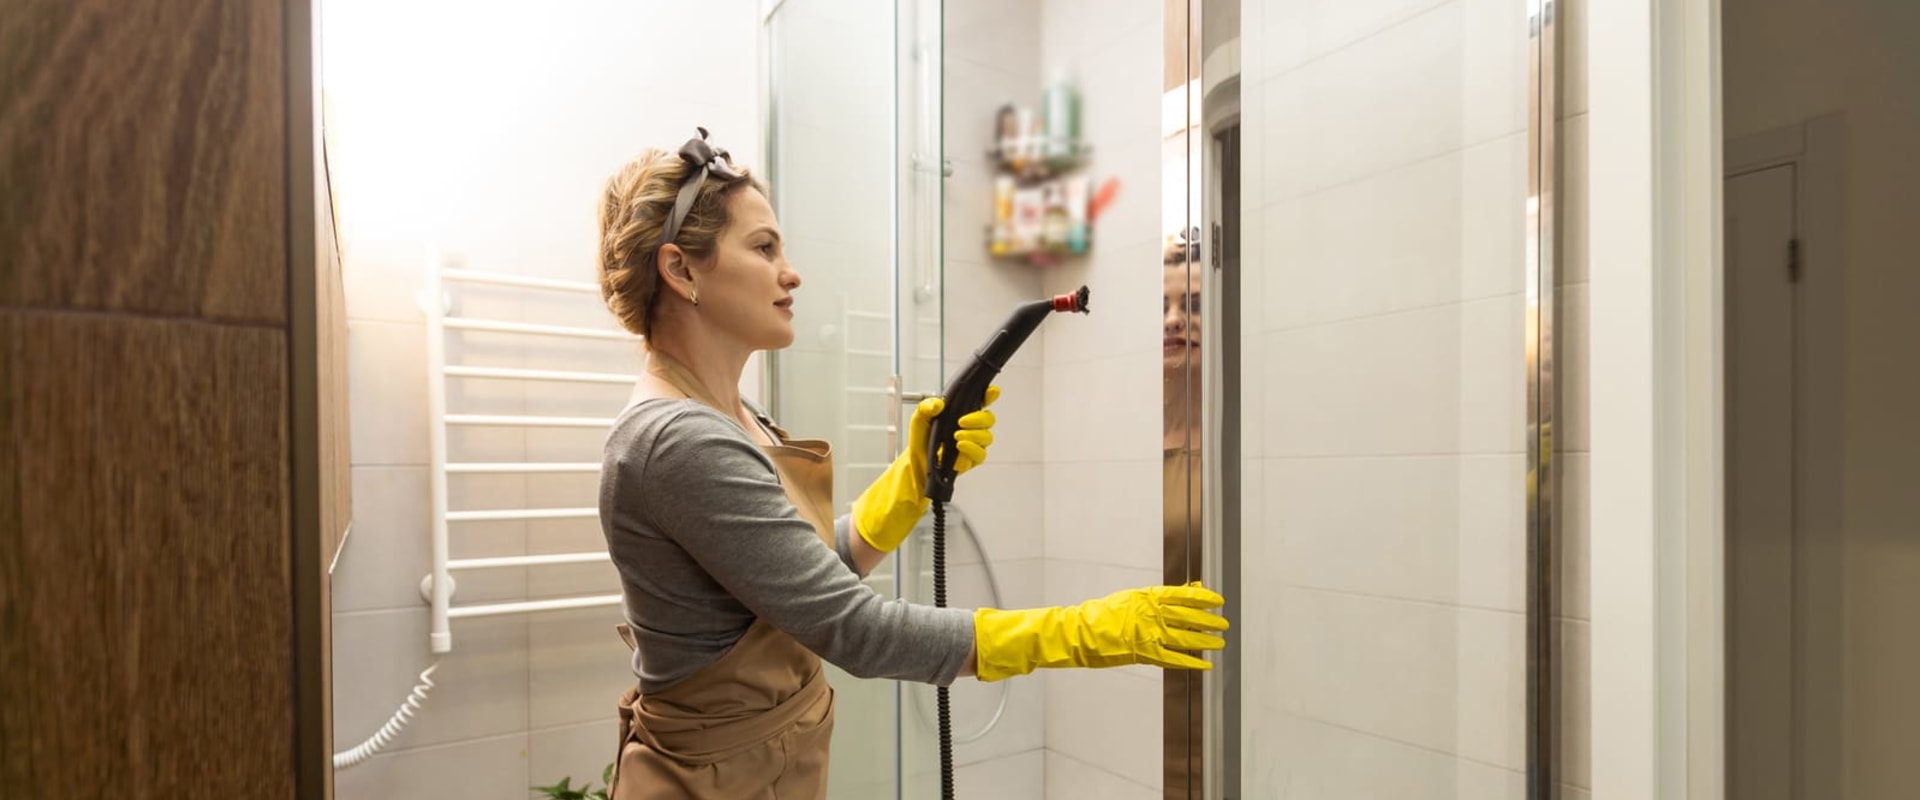 Enhance Your Home's Appeal: The Benefits Of Housekeeper Services And Home Window Replacement In Katy, TX